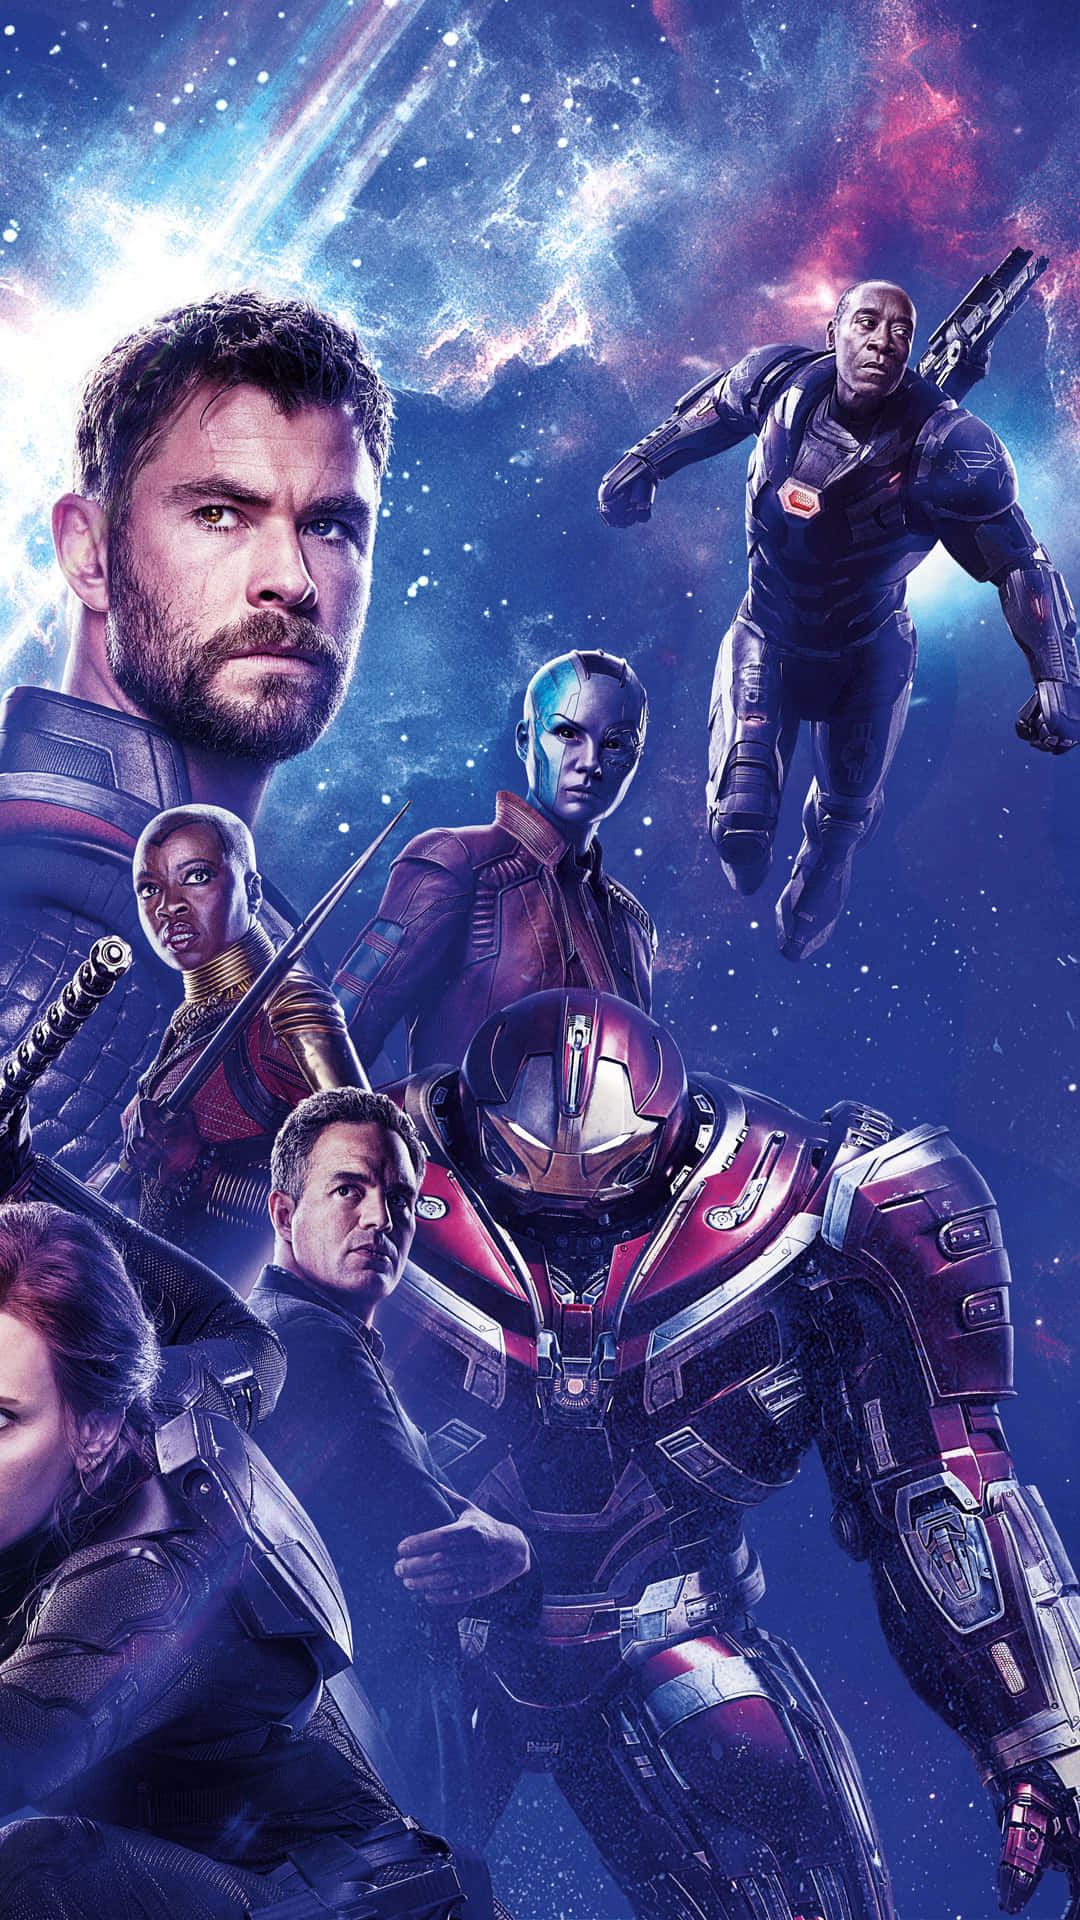 Join the Avengers Force with the Avengers Endgame Iphone! Wallpaper